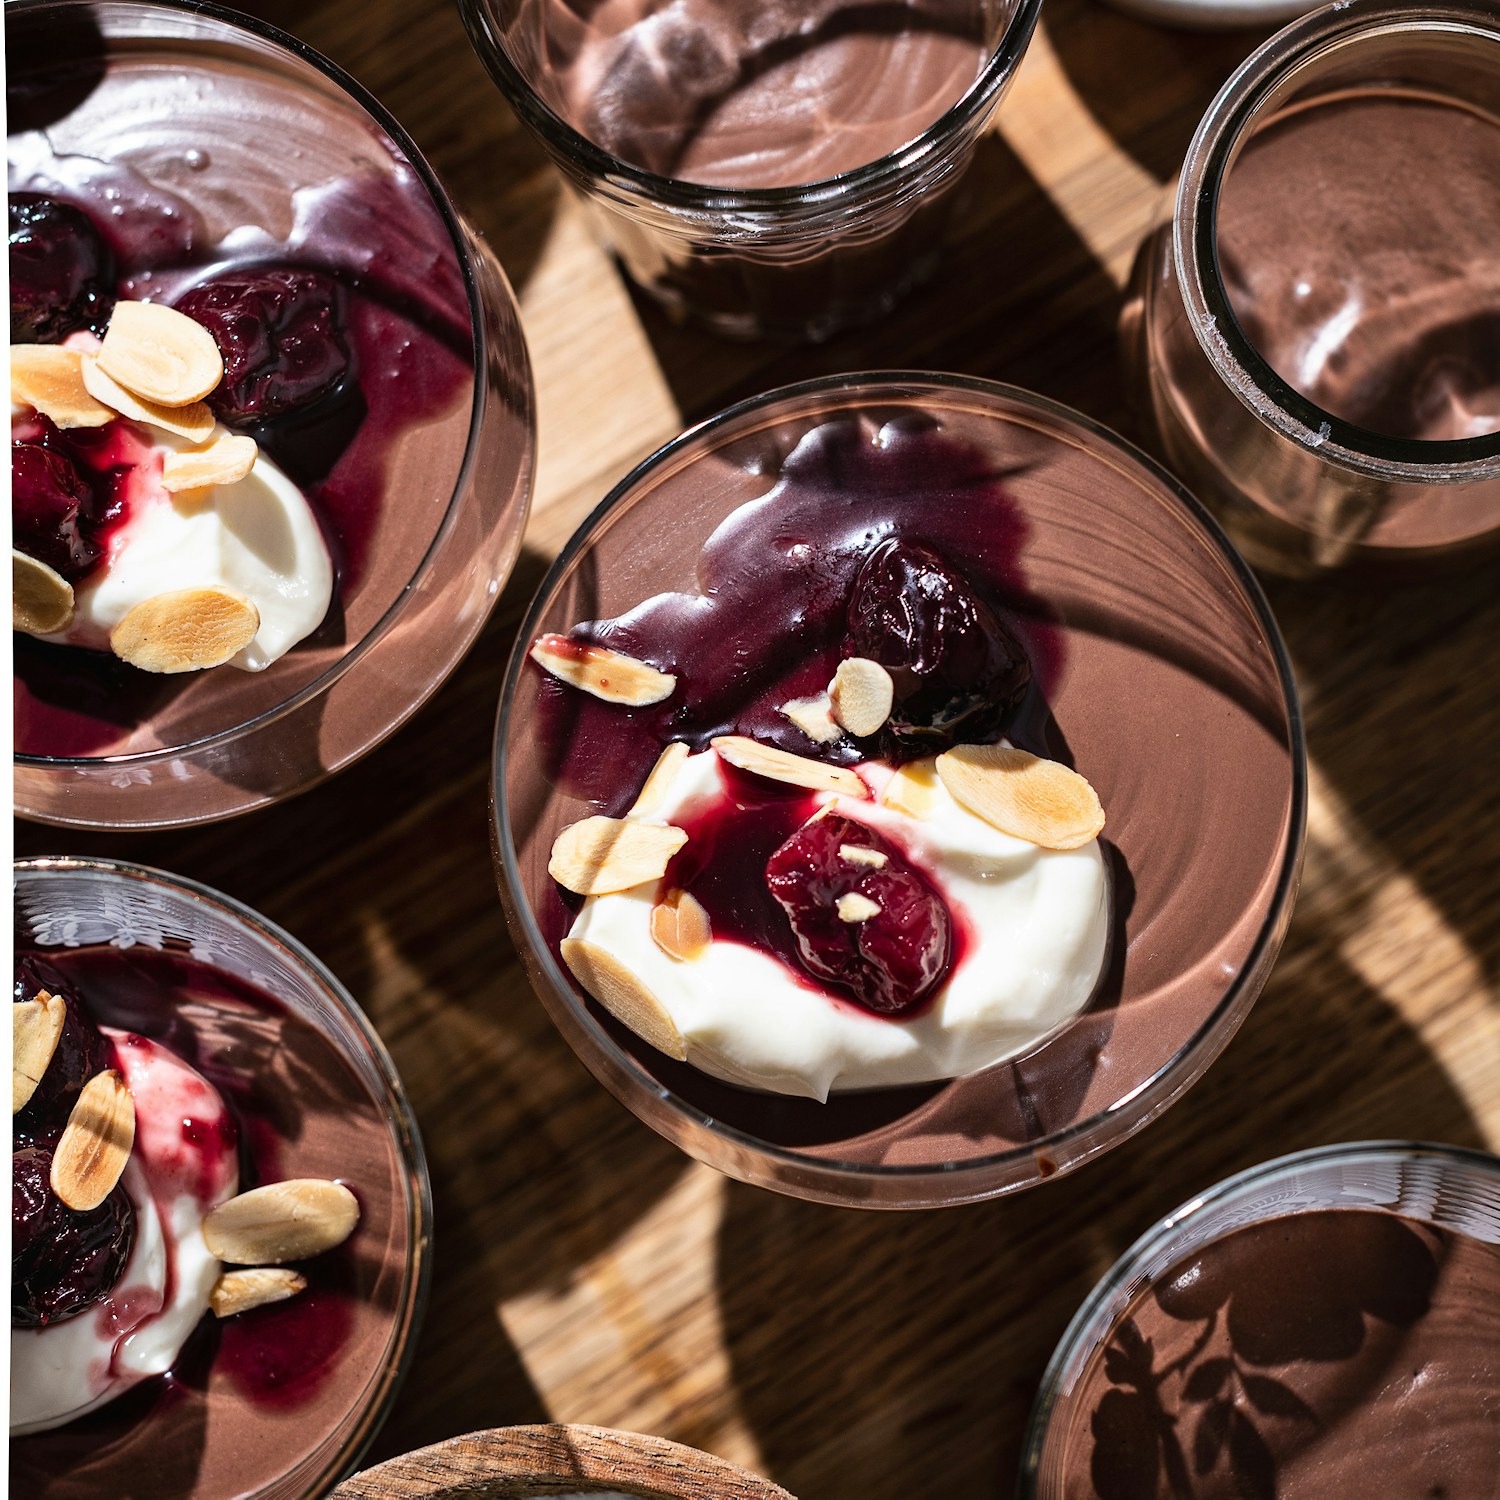 Silky Chocolate and Vanilla Pudding with Cherry Compote